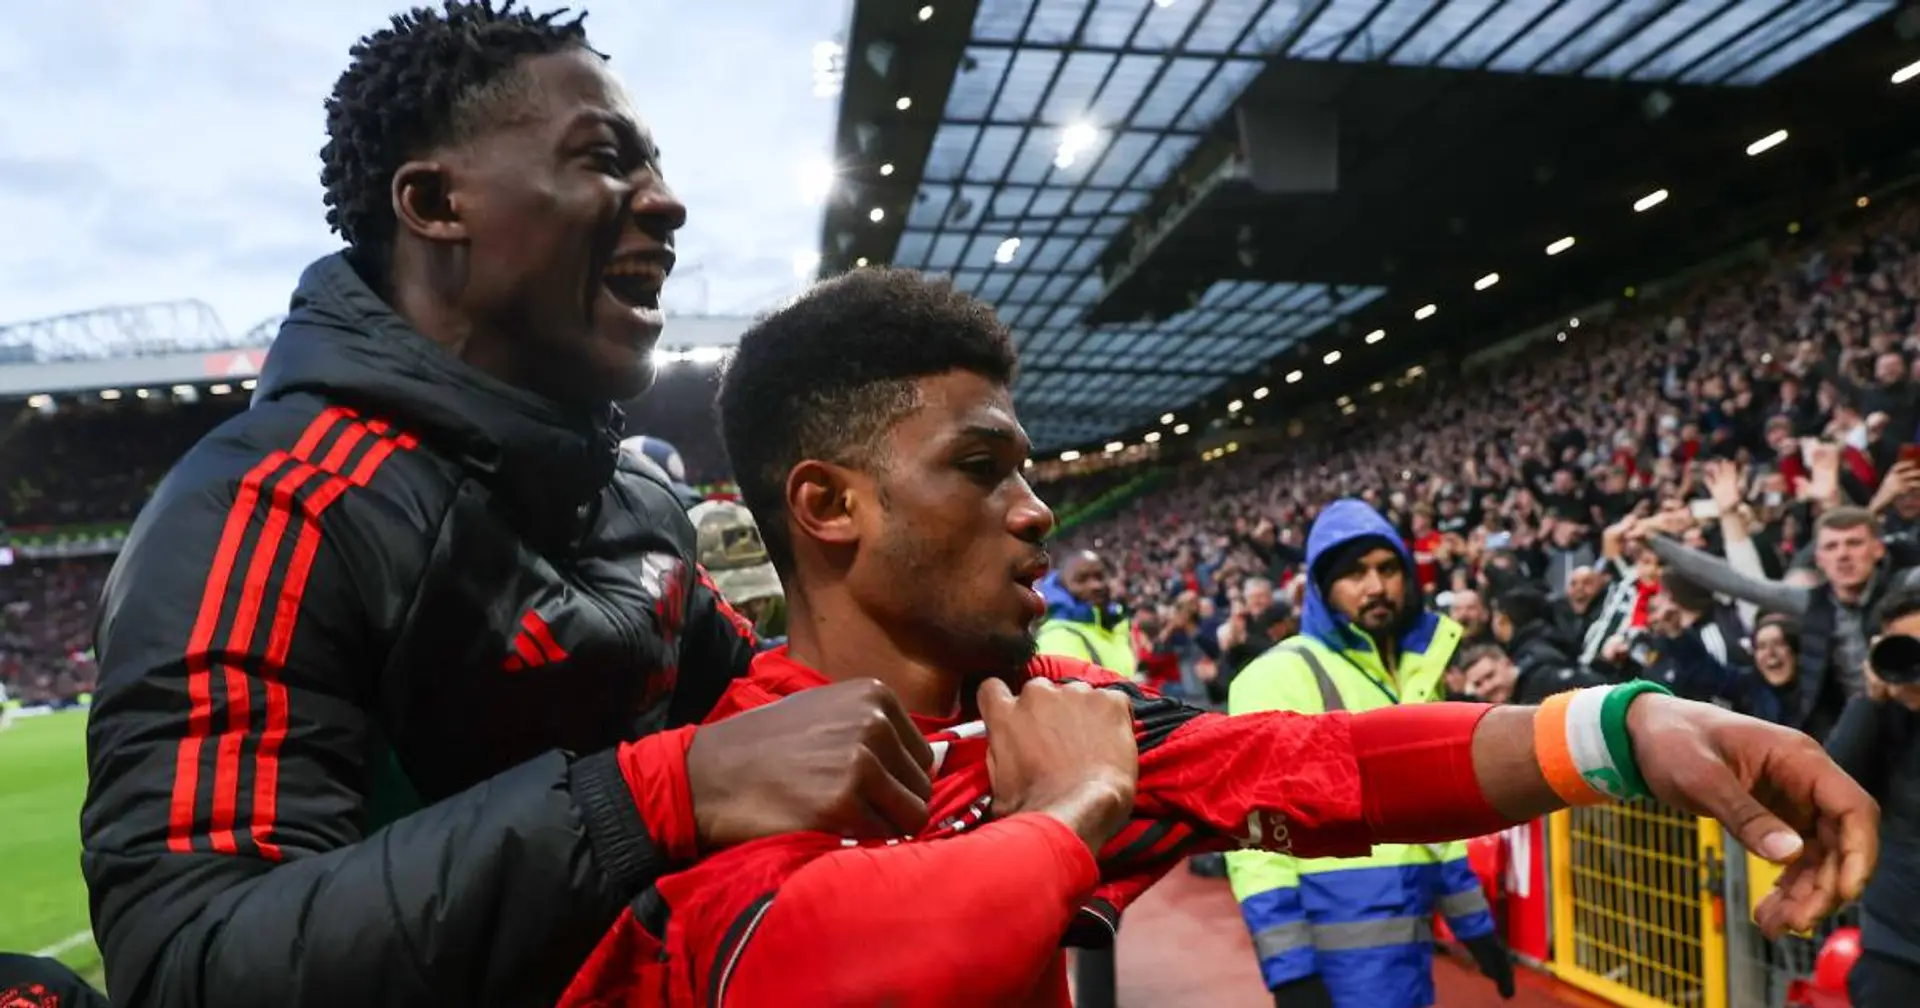 Amad - 9, Dalot - 8: Rating Man United players in CRAZY 4-3 win over Liverpool